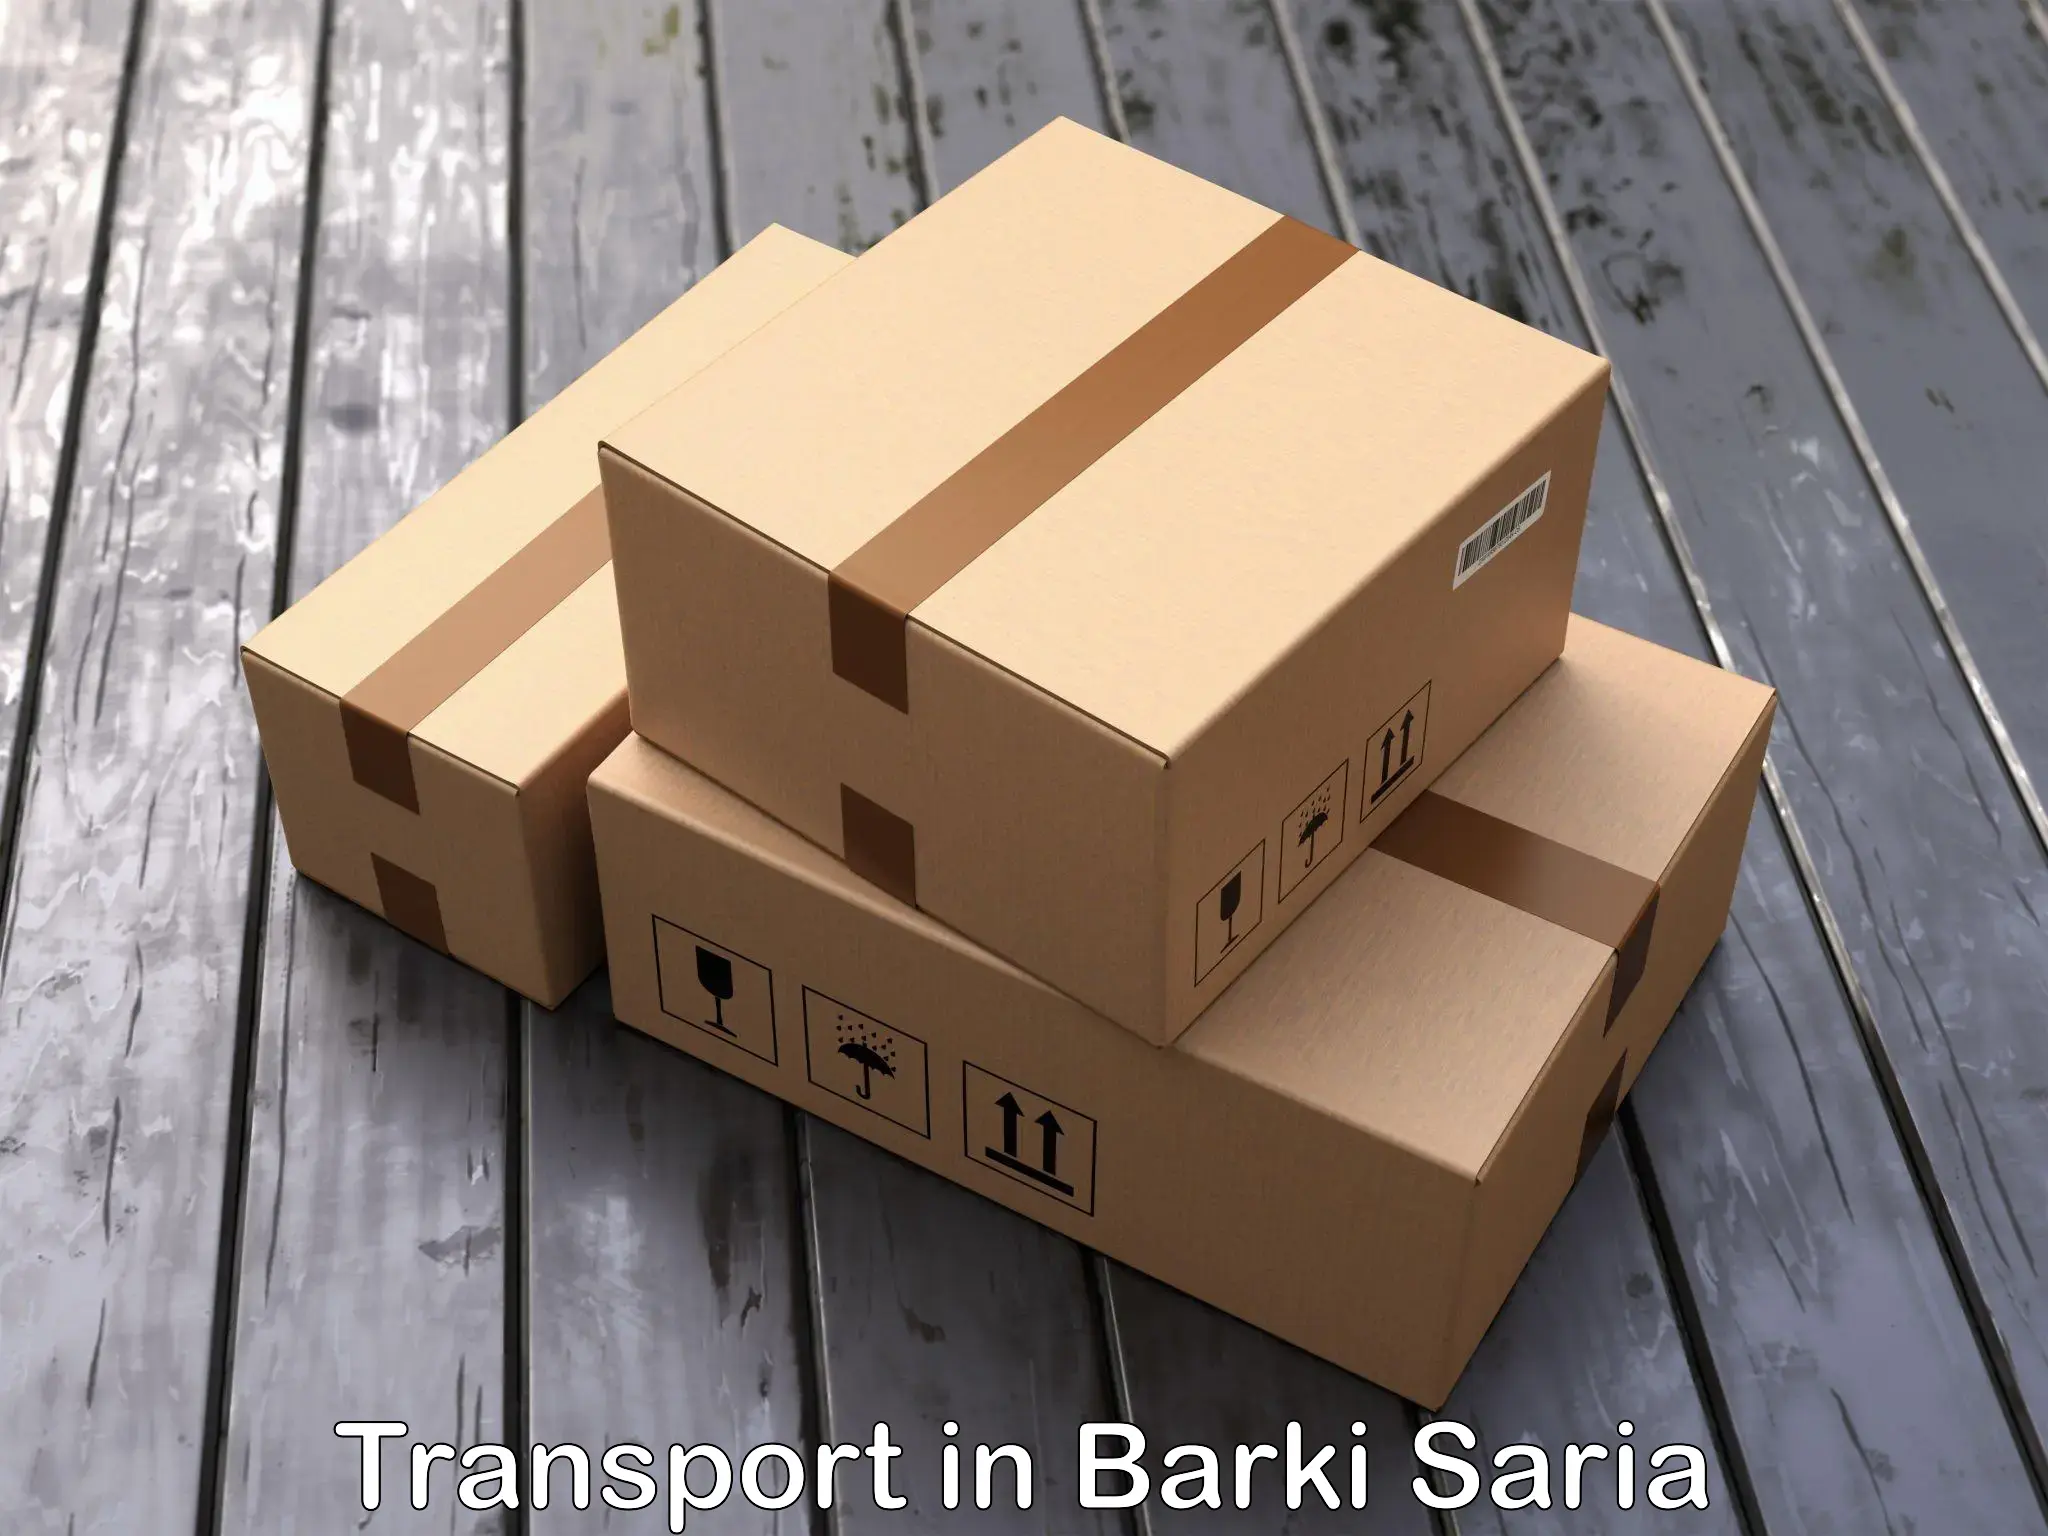 Air freight transport services in Barki Saria